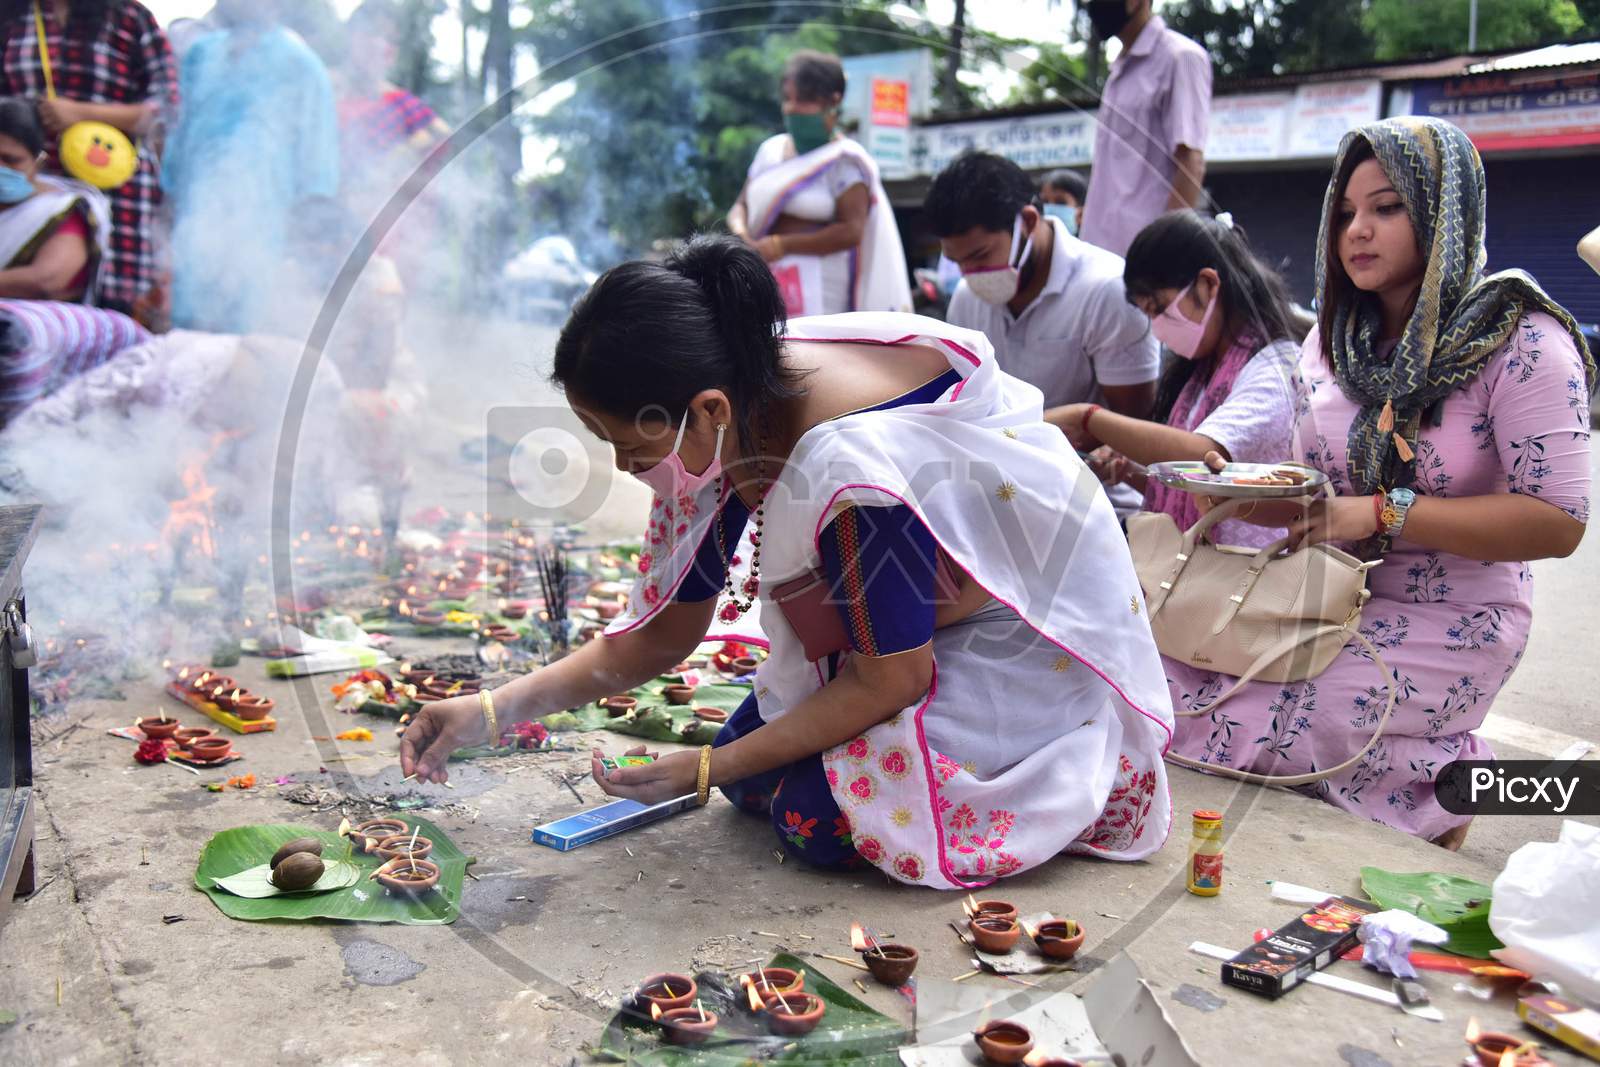 Devotees Lighting The Earthen Lamp To Offer Prayers To Lord Ganesha On The Occasion Of  Ganesh Chaturthi Festival In Nagaon District Of Assam On August 22,2020.